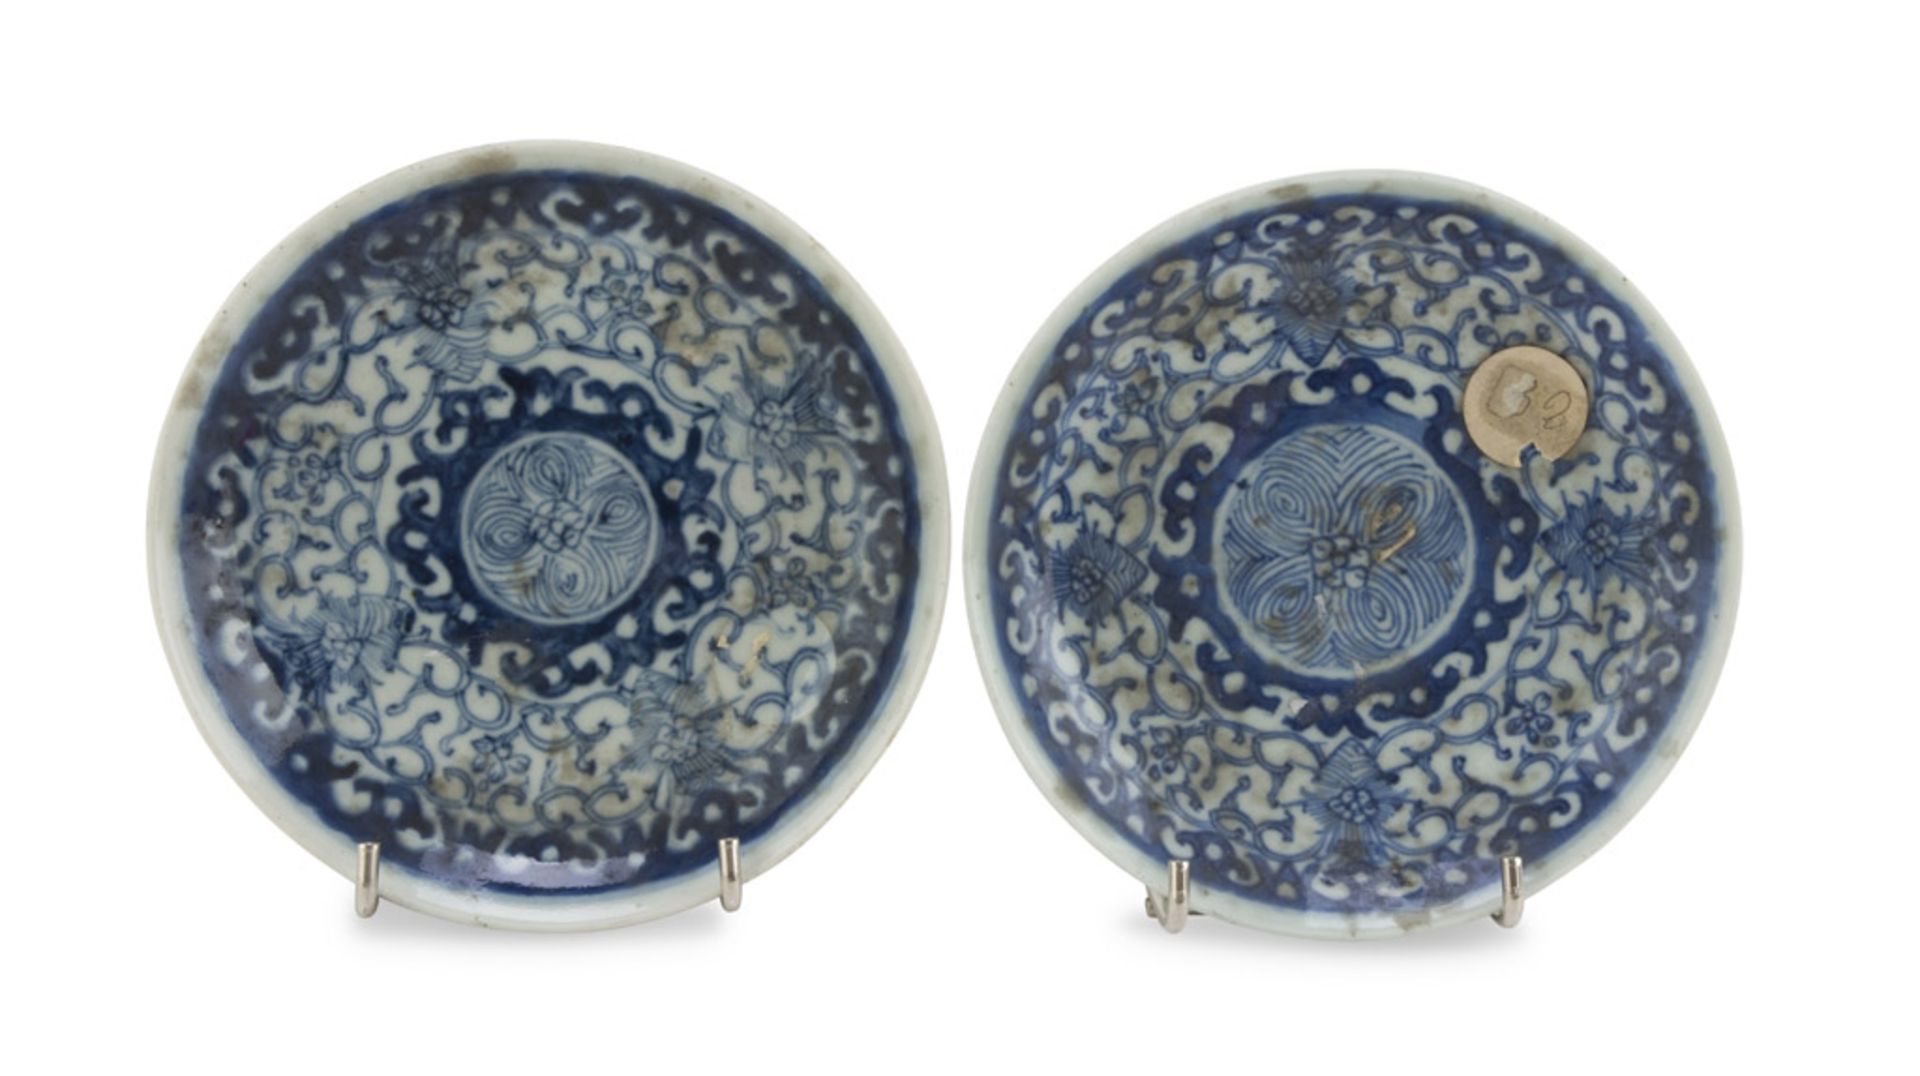 TWO WHITE AND BLUE PORCELAIN DISHES, CHINA 19TH CENTURY decorated with floral interlacements and